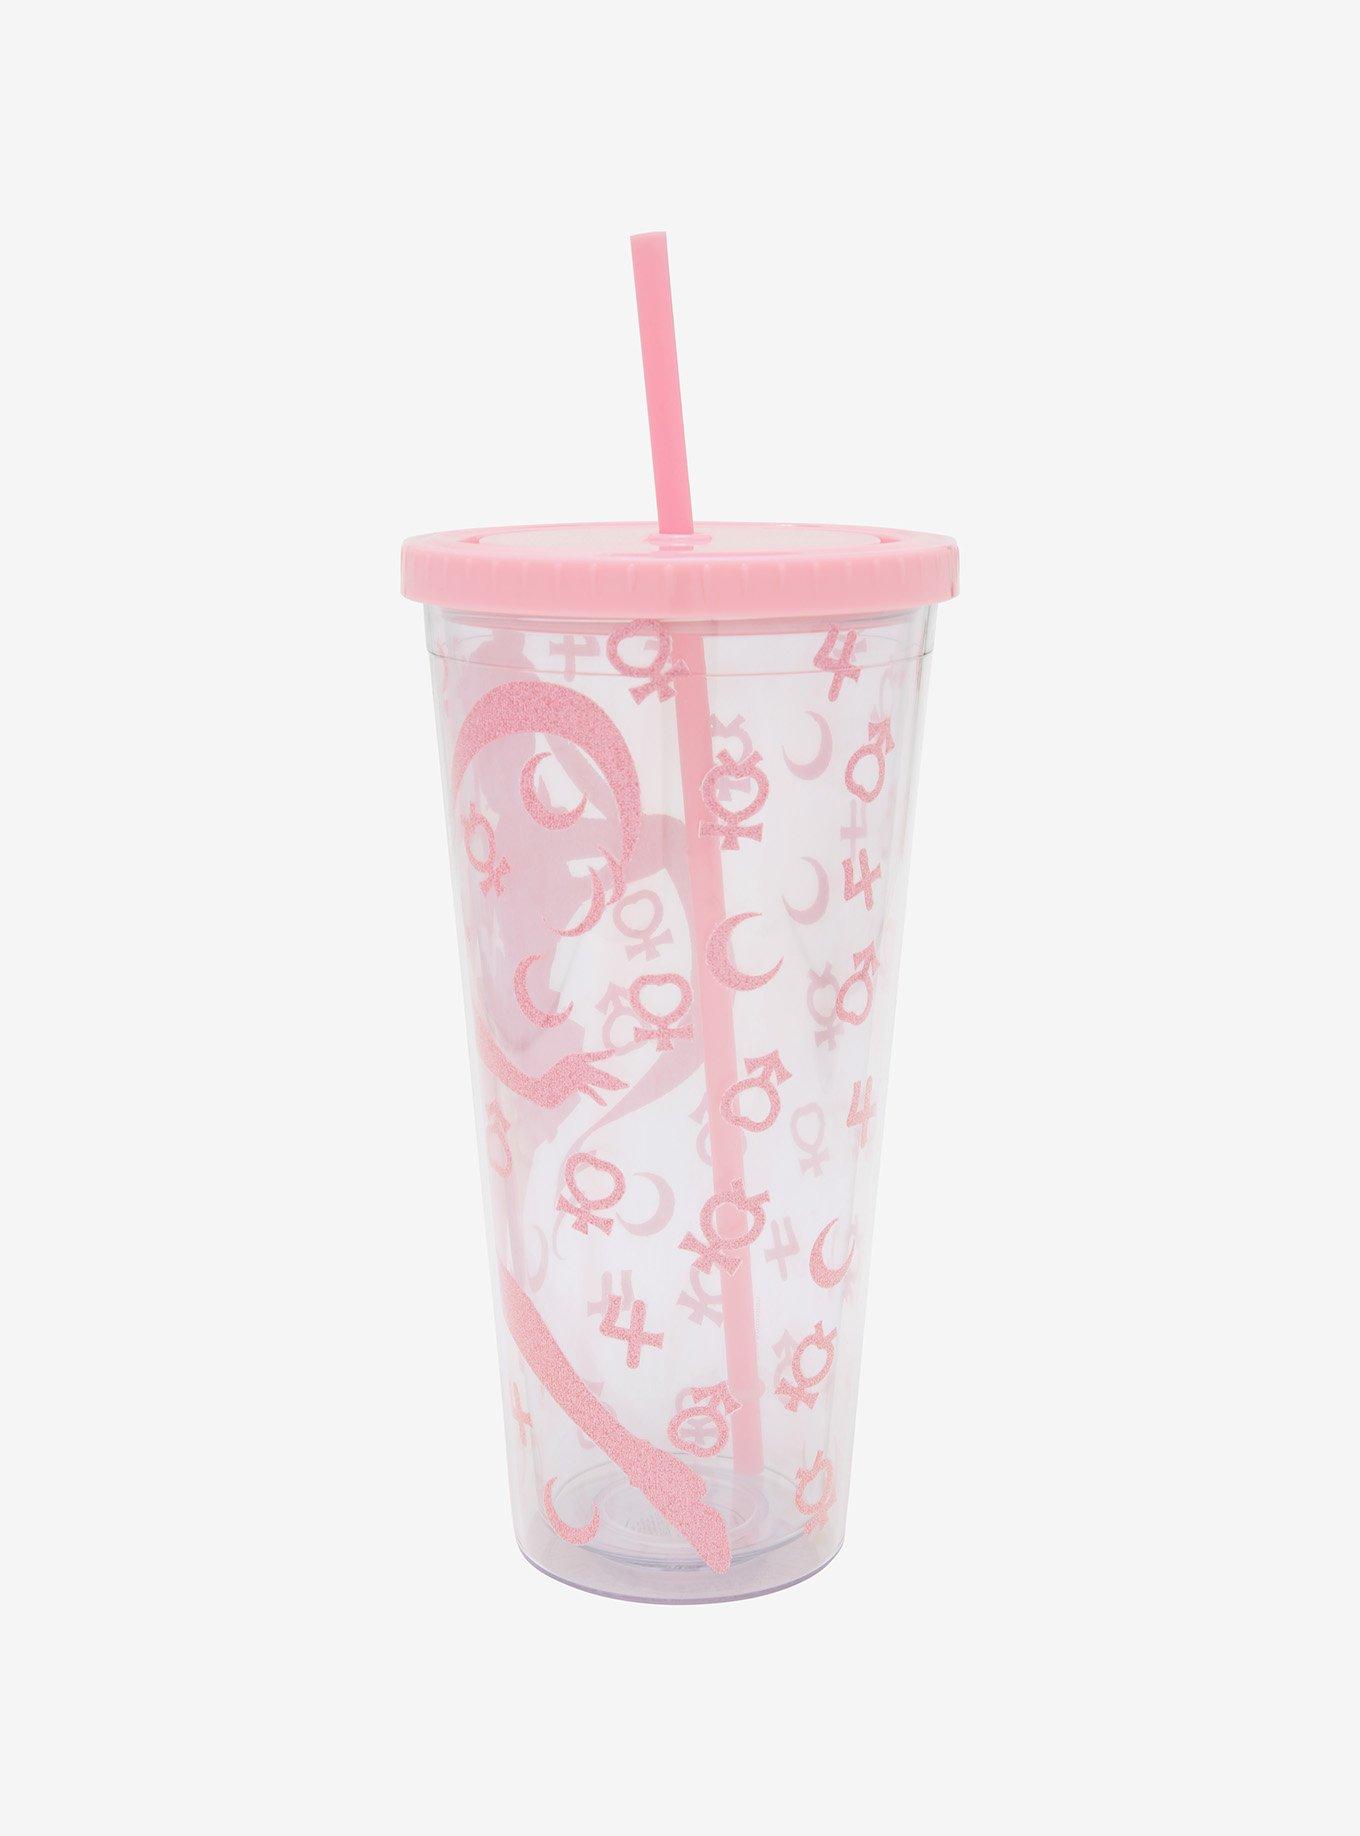 Sailor Moon Pink Silhouette Planetary Symbols Acrylic Travel Cup, , alternate